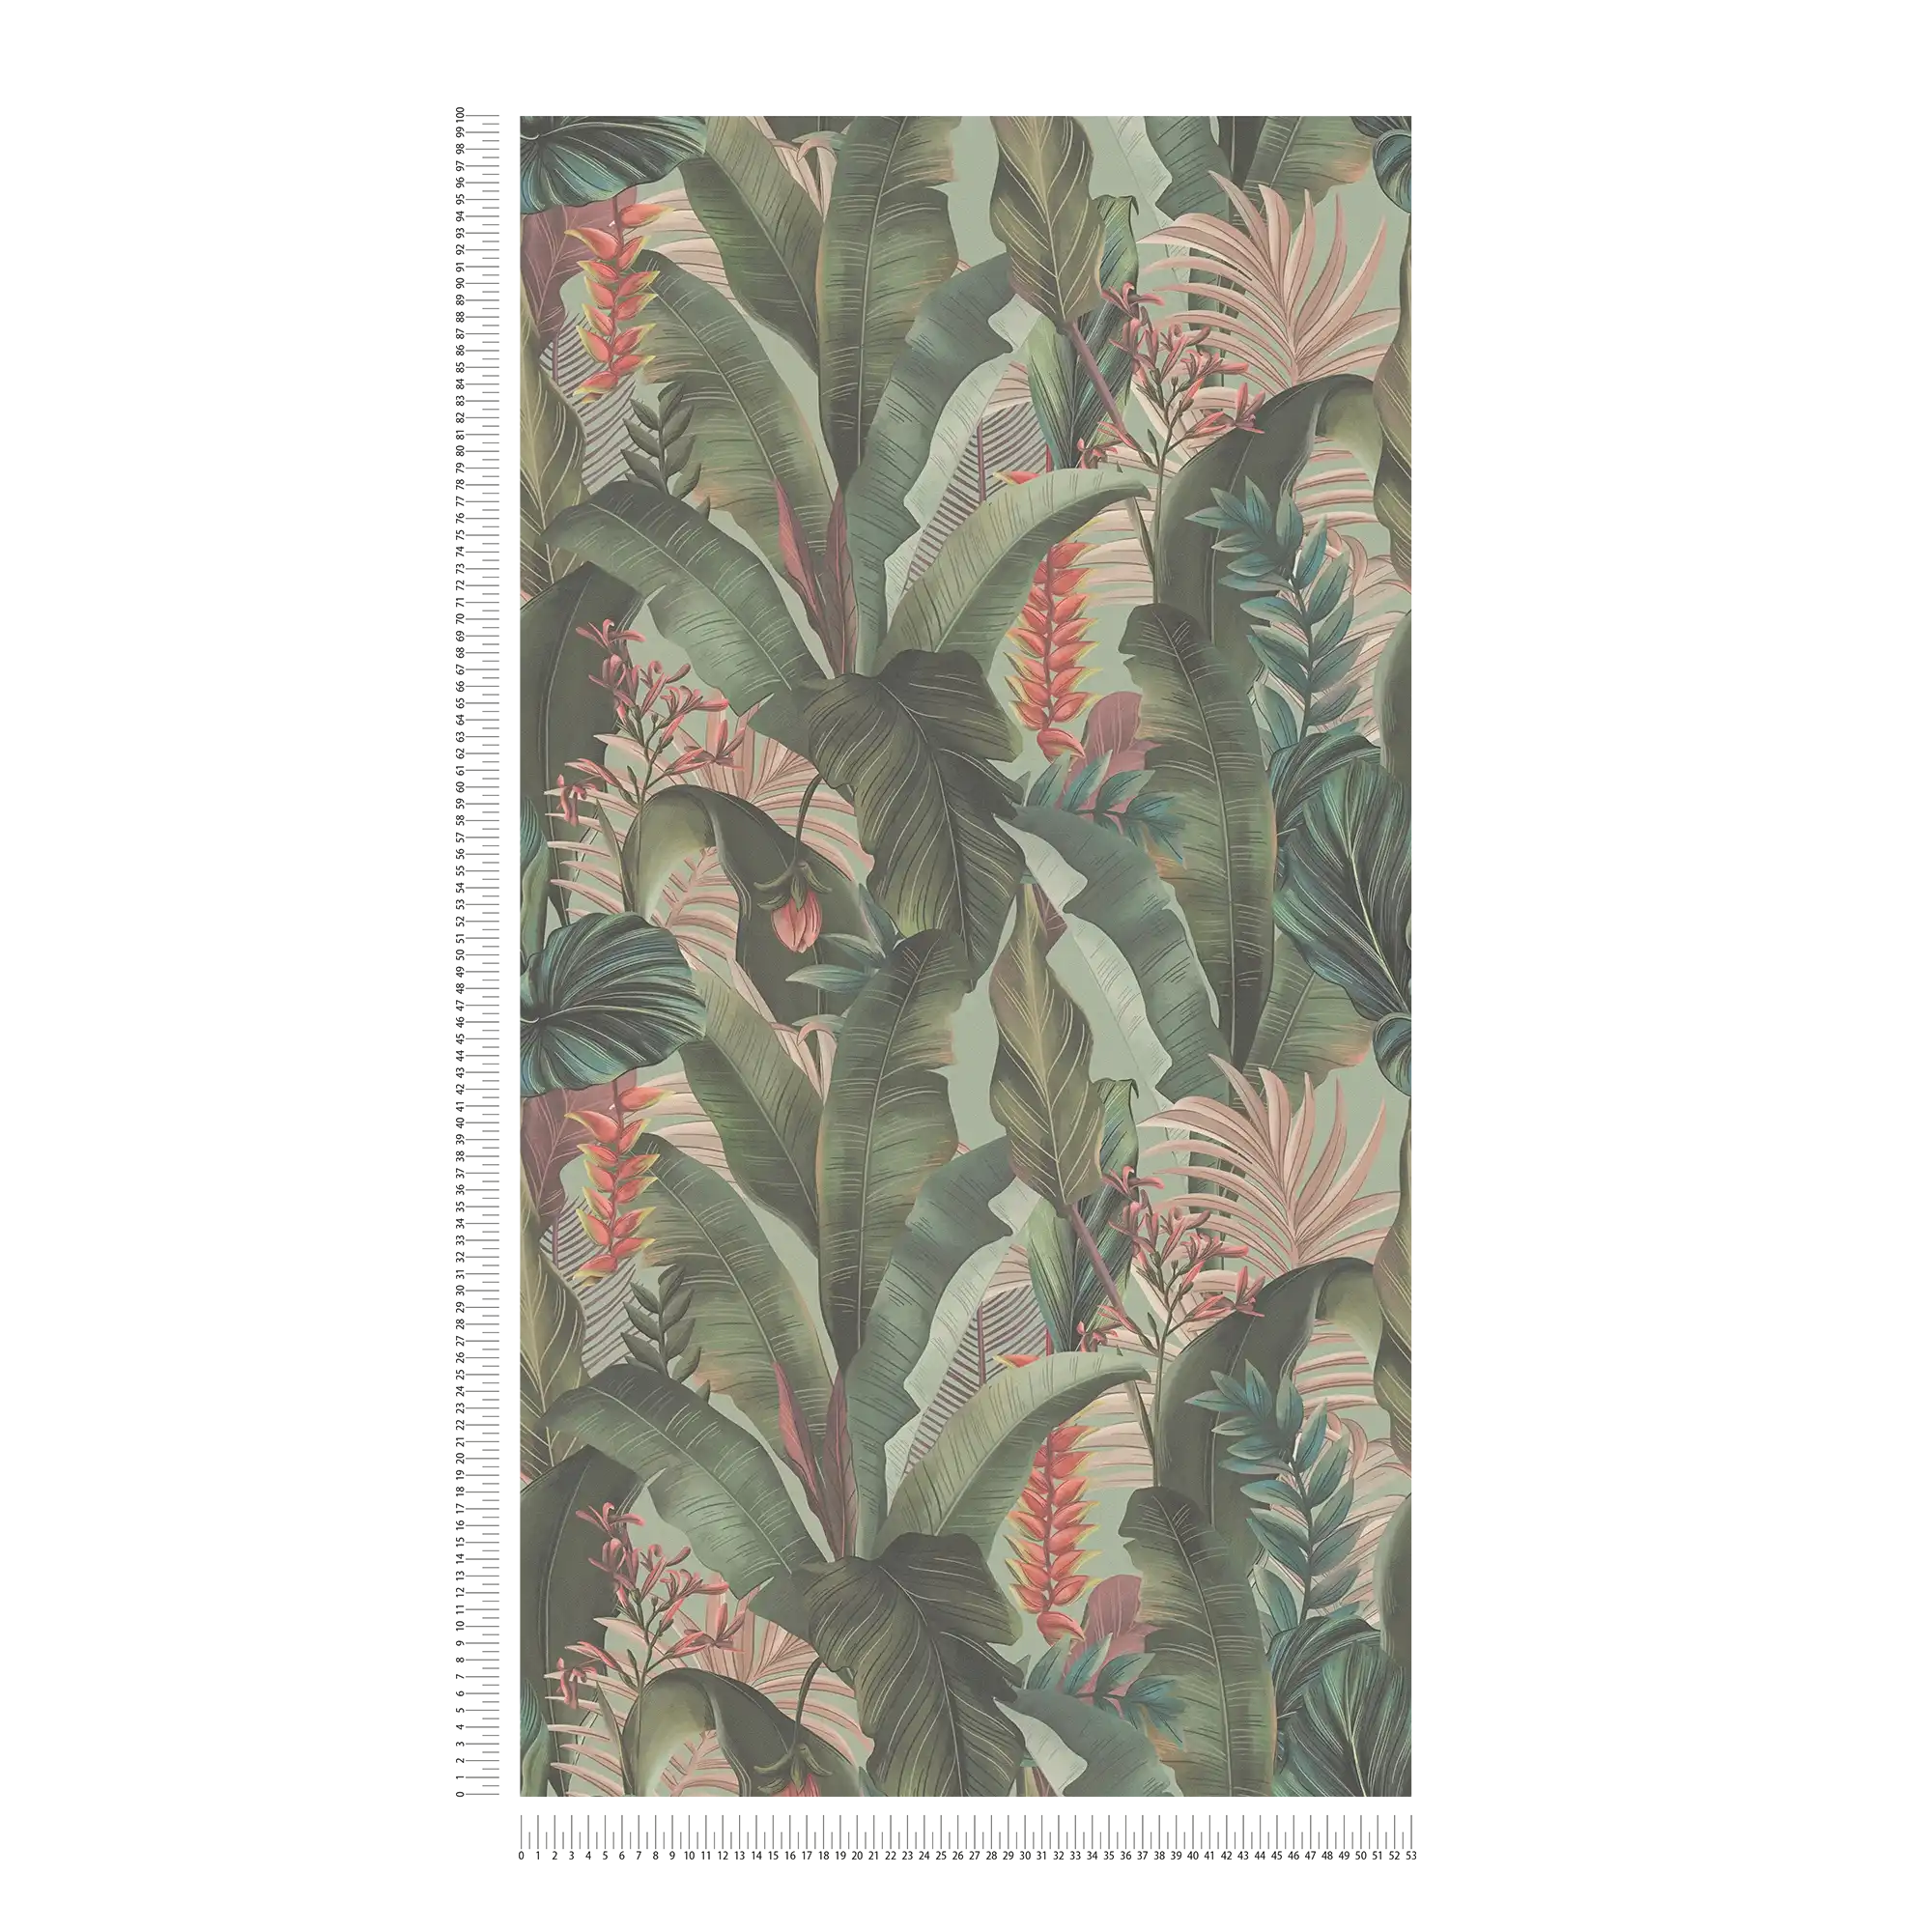             Floral jungle wallpaper with palm leaves & flowers textured matt - green, pink, red
        